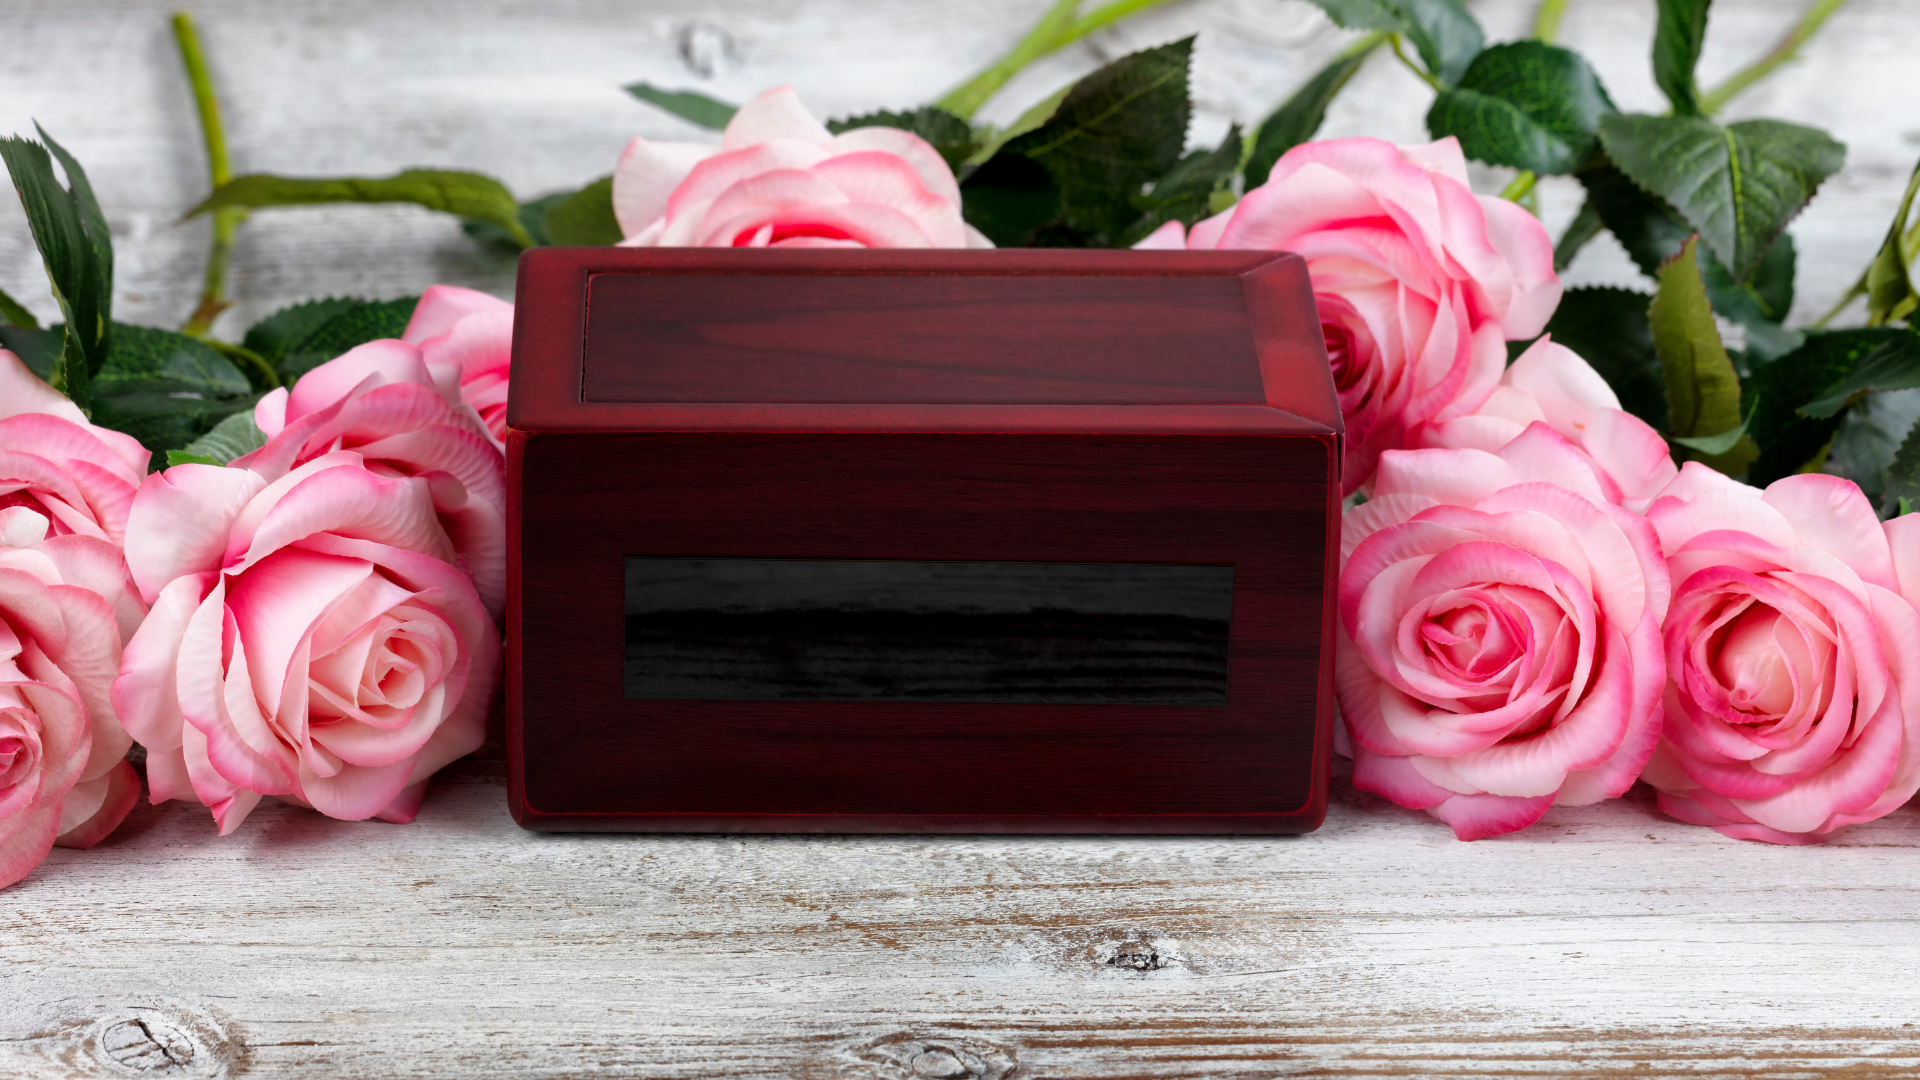 An image of a brown cremation box sitting on a white faded wooden table with pink roses beside it